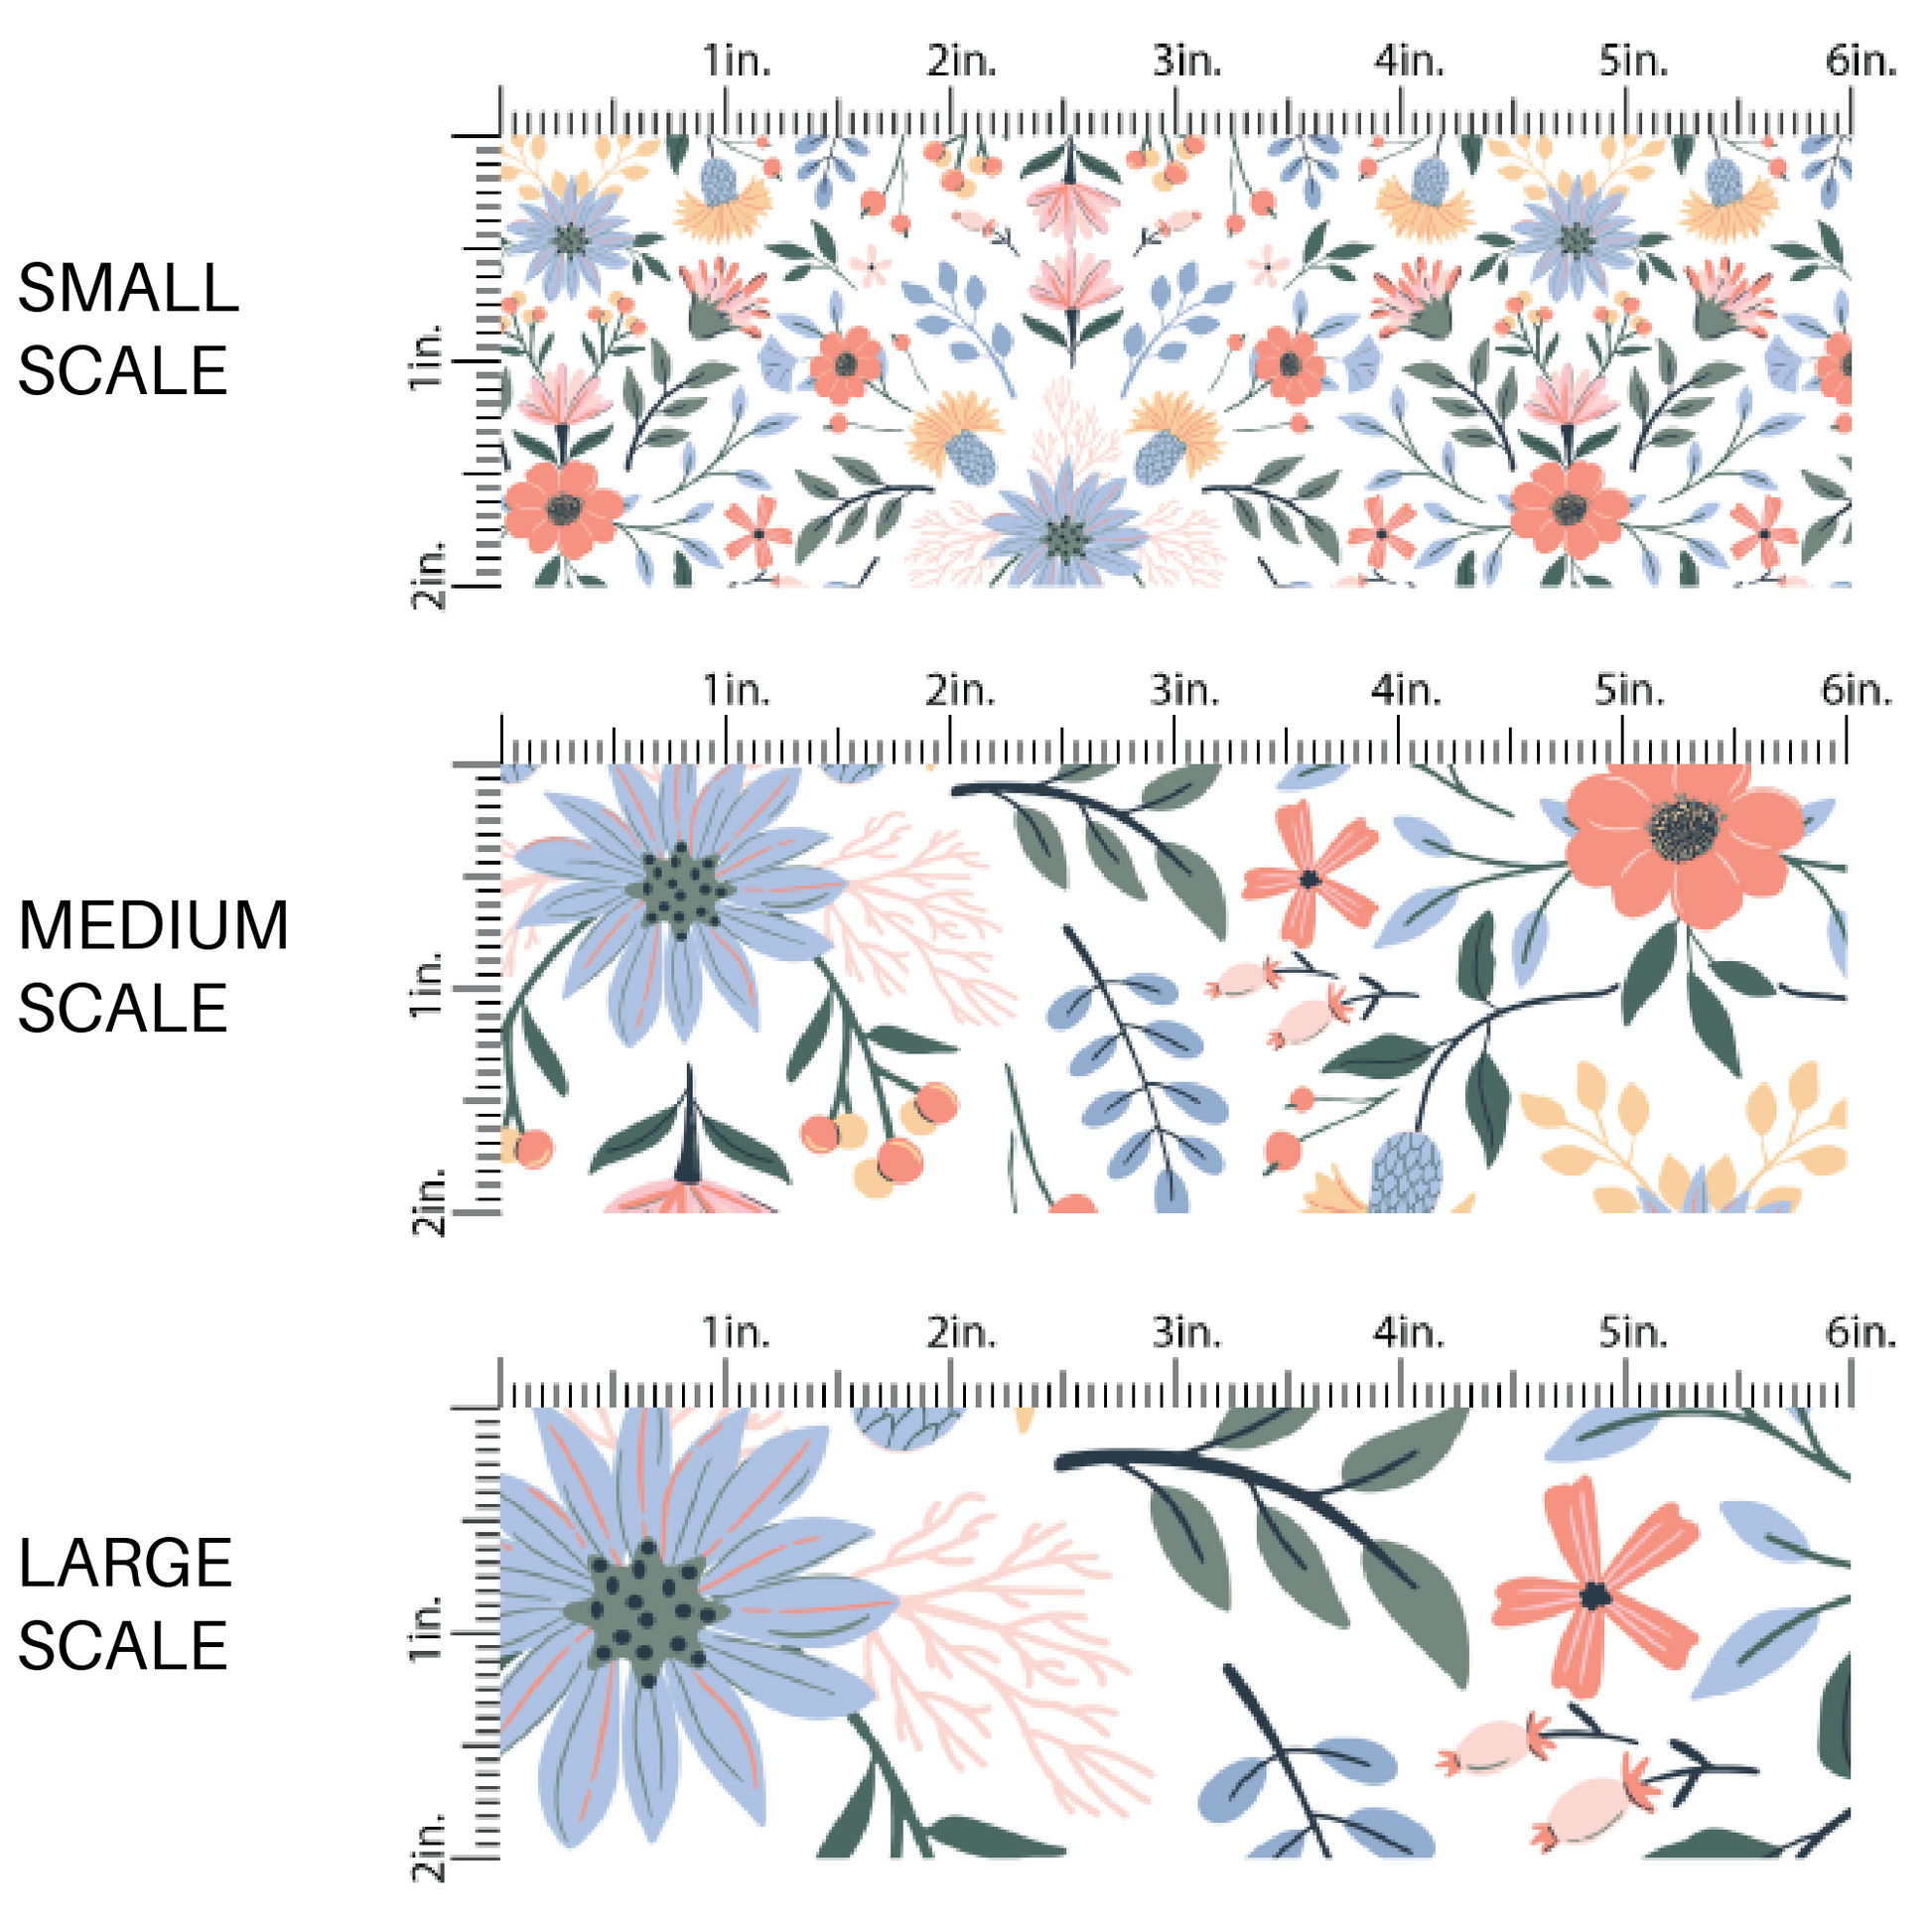 Bright Western Florals on Cream Fabric by the Yard scaled image guide.